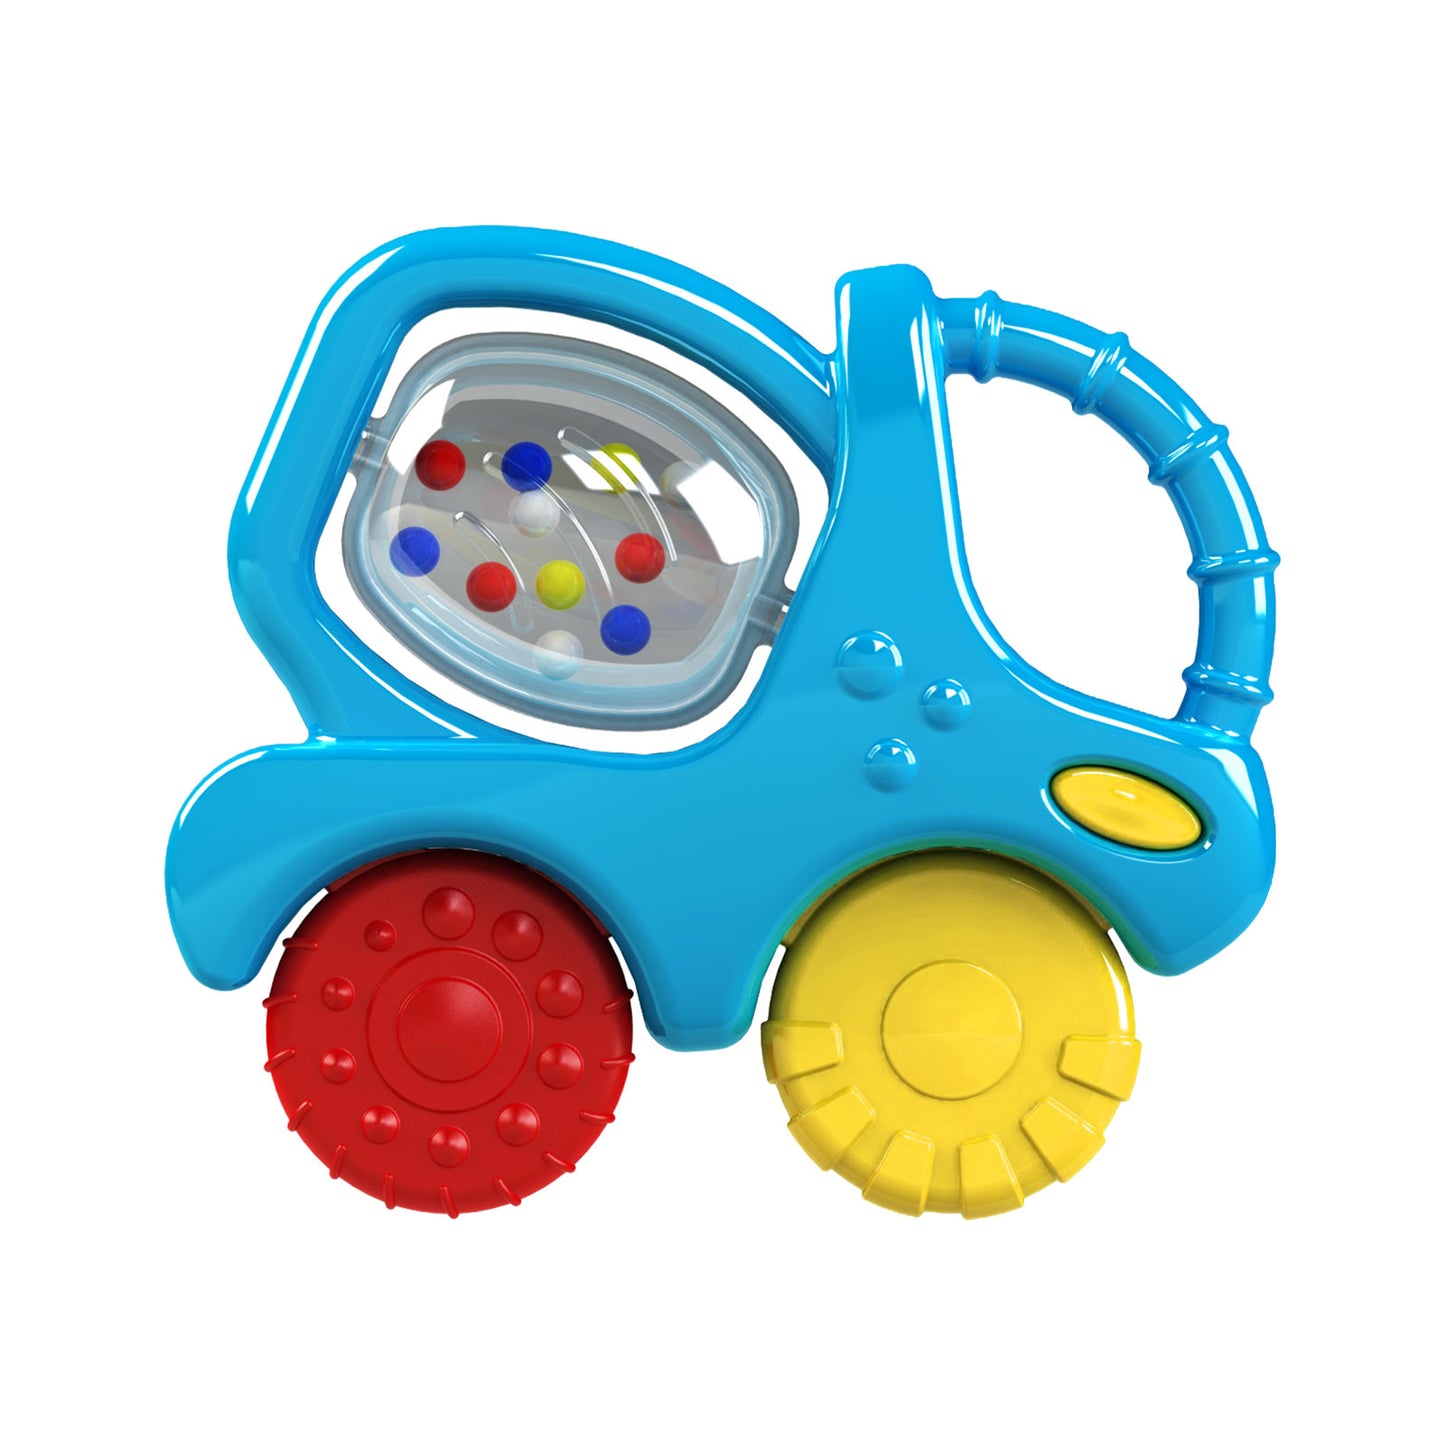 mixer truck for playing kids